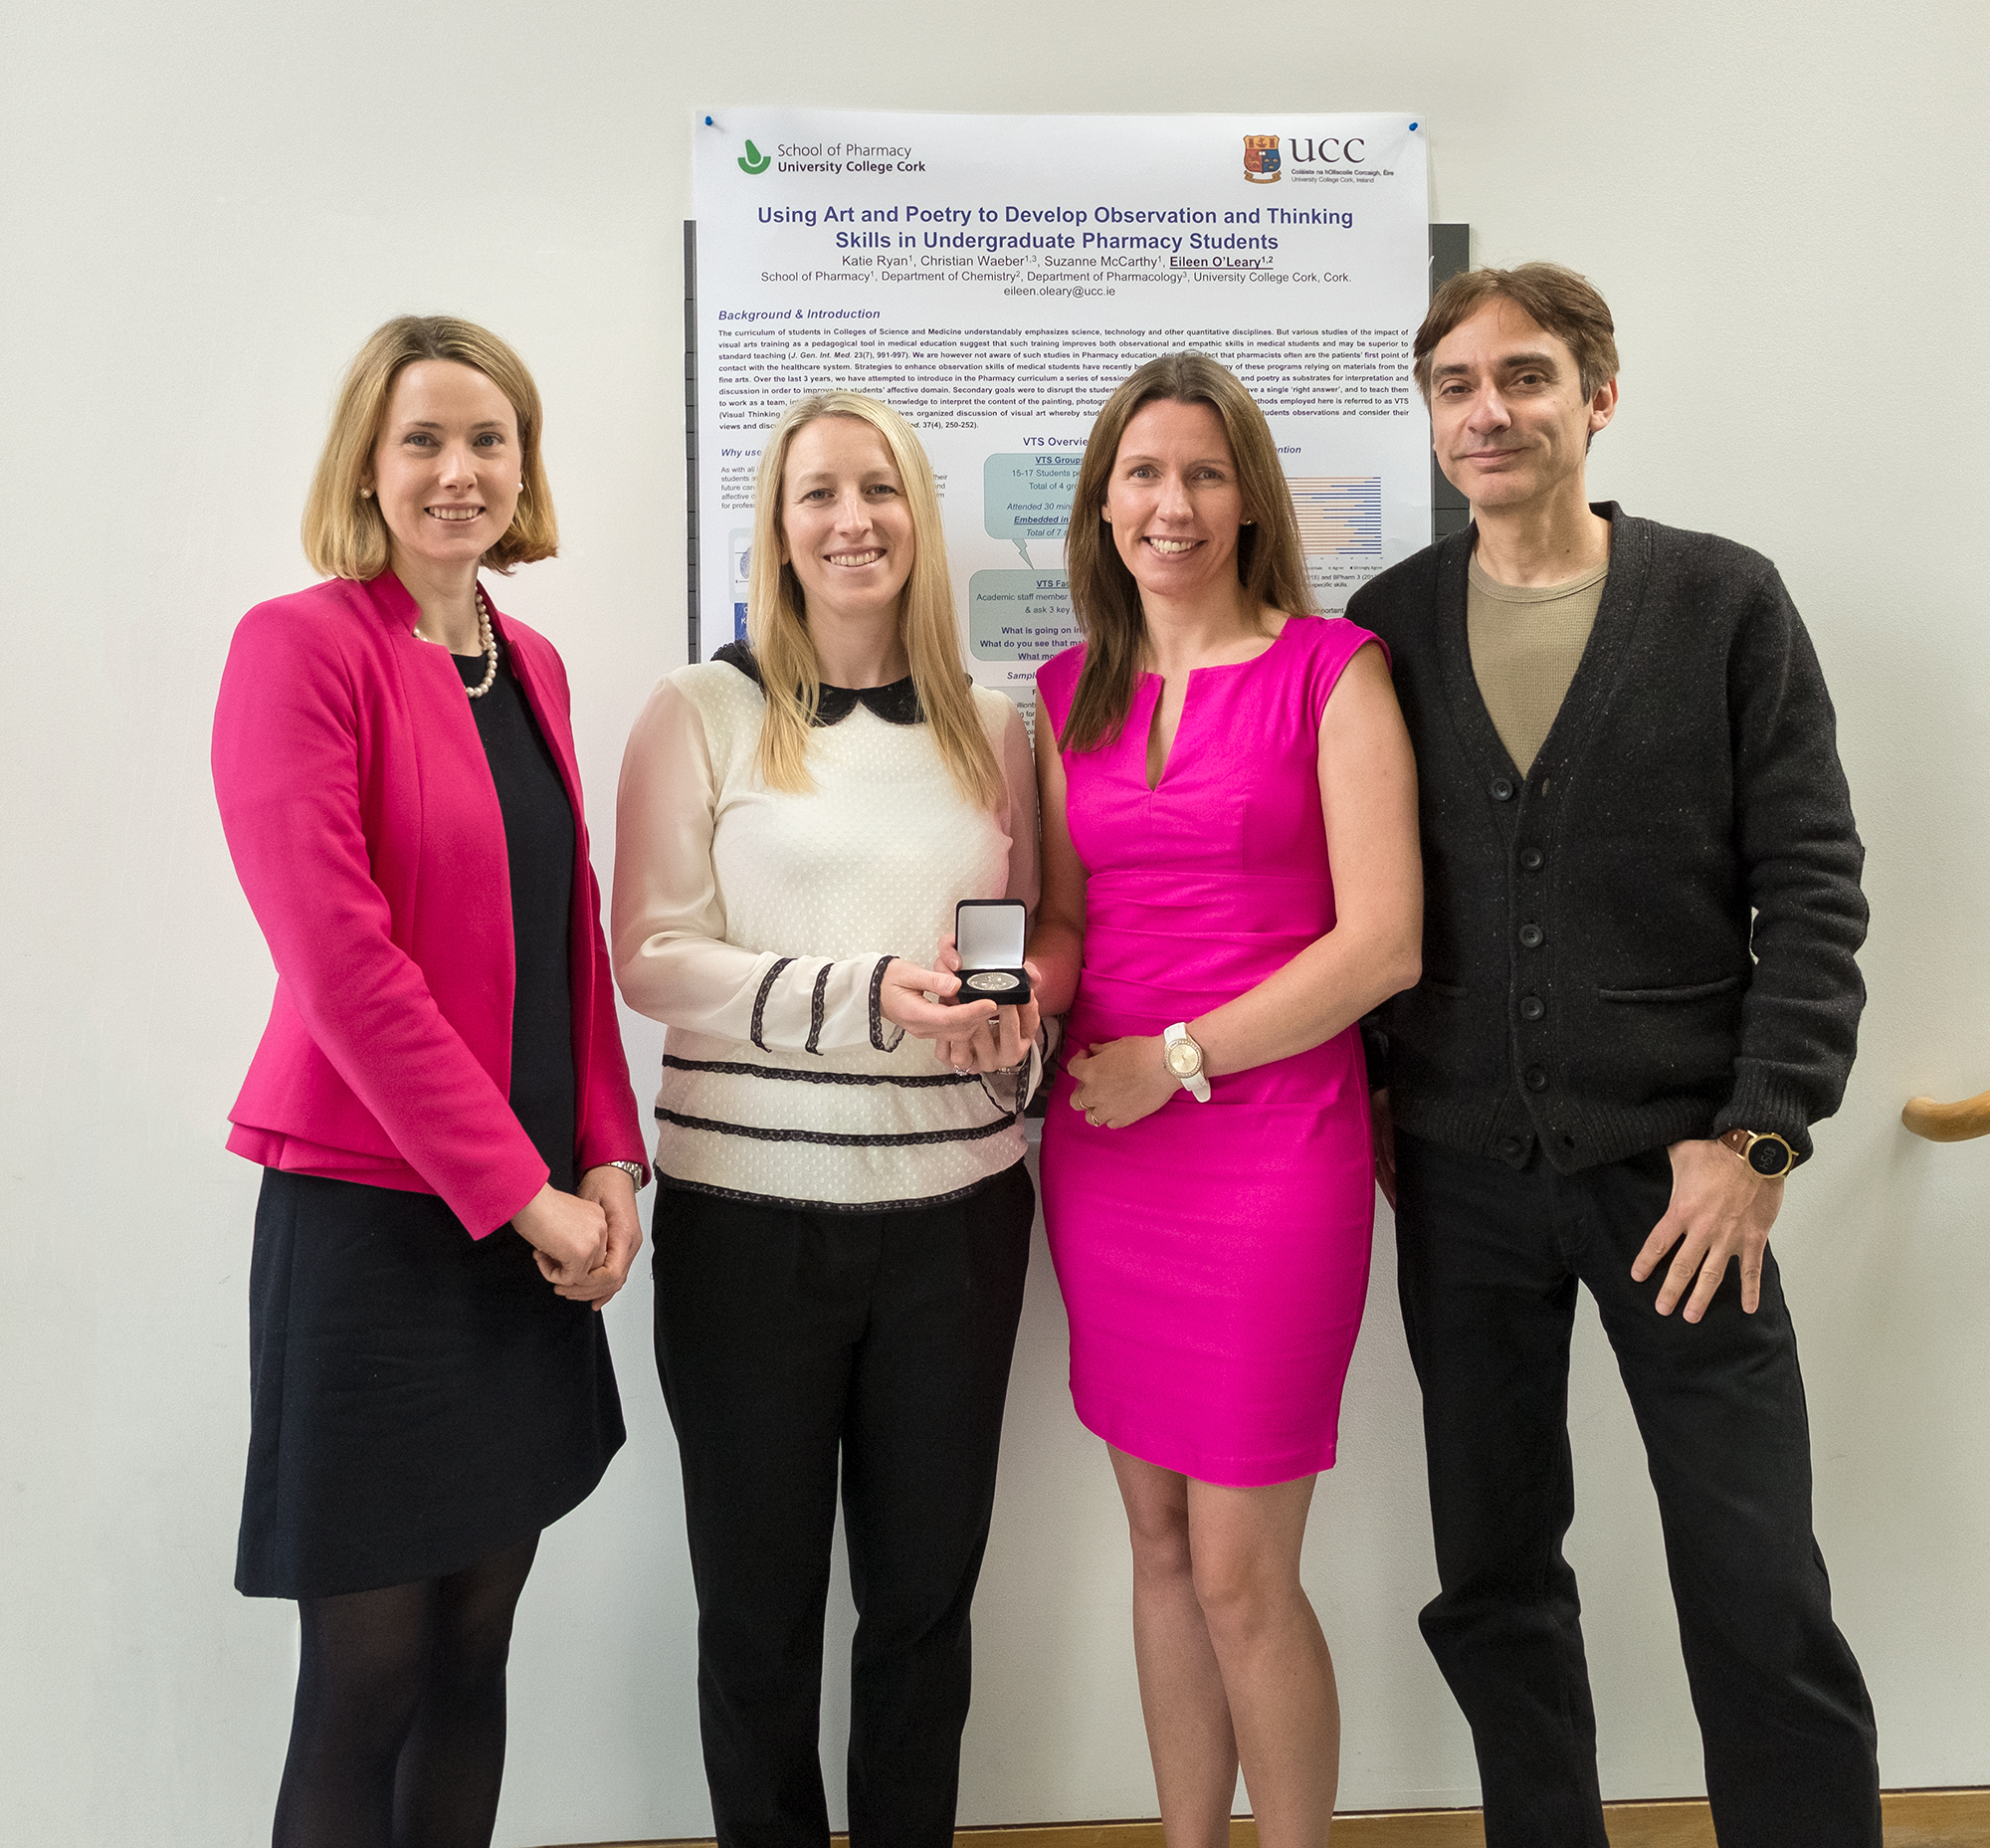 School of Pharmacy team receives award for their study on the use of art-based teaching strategies